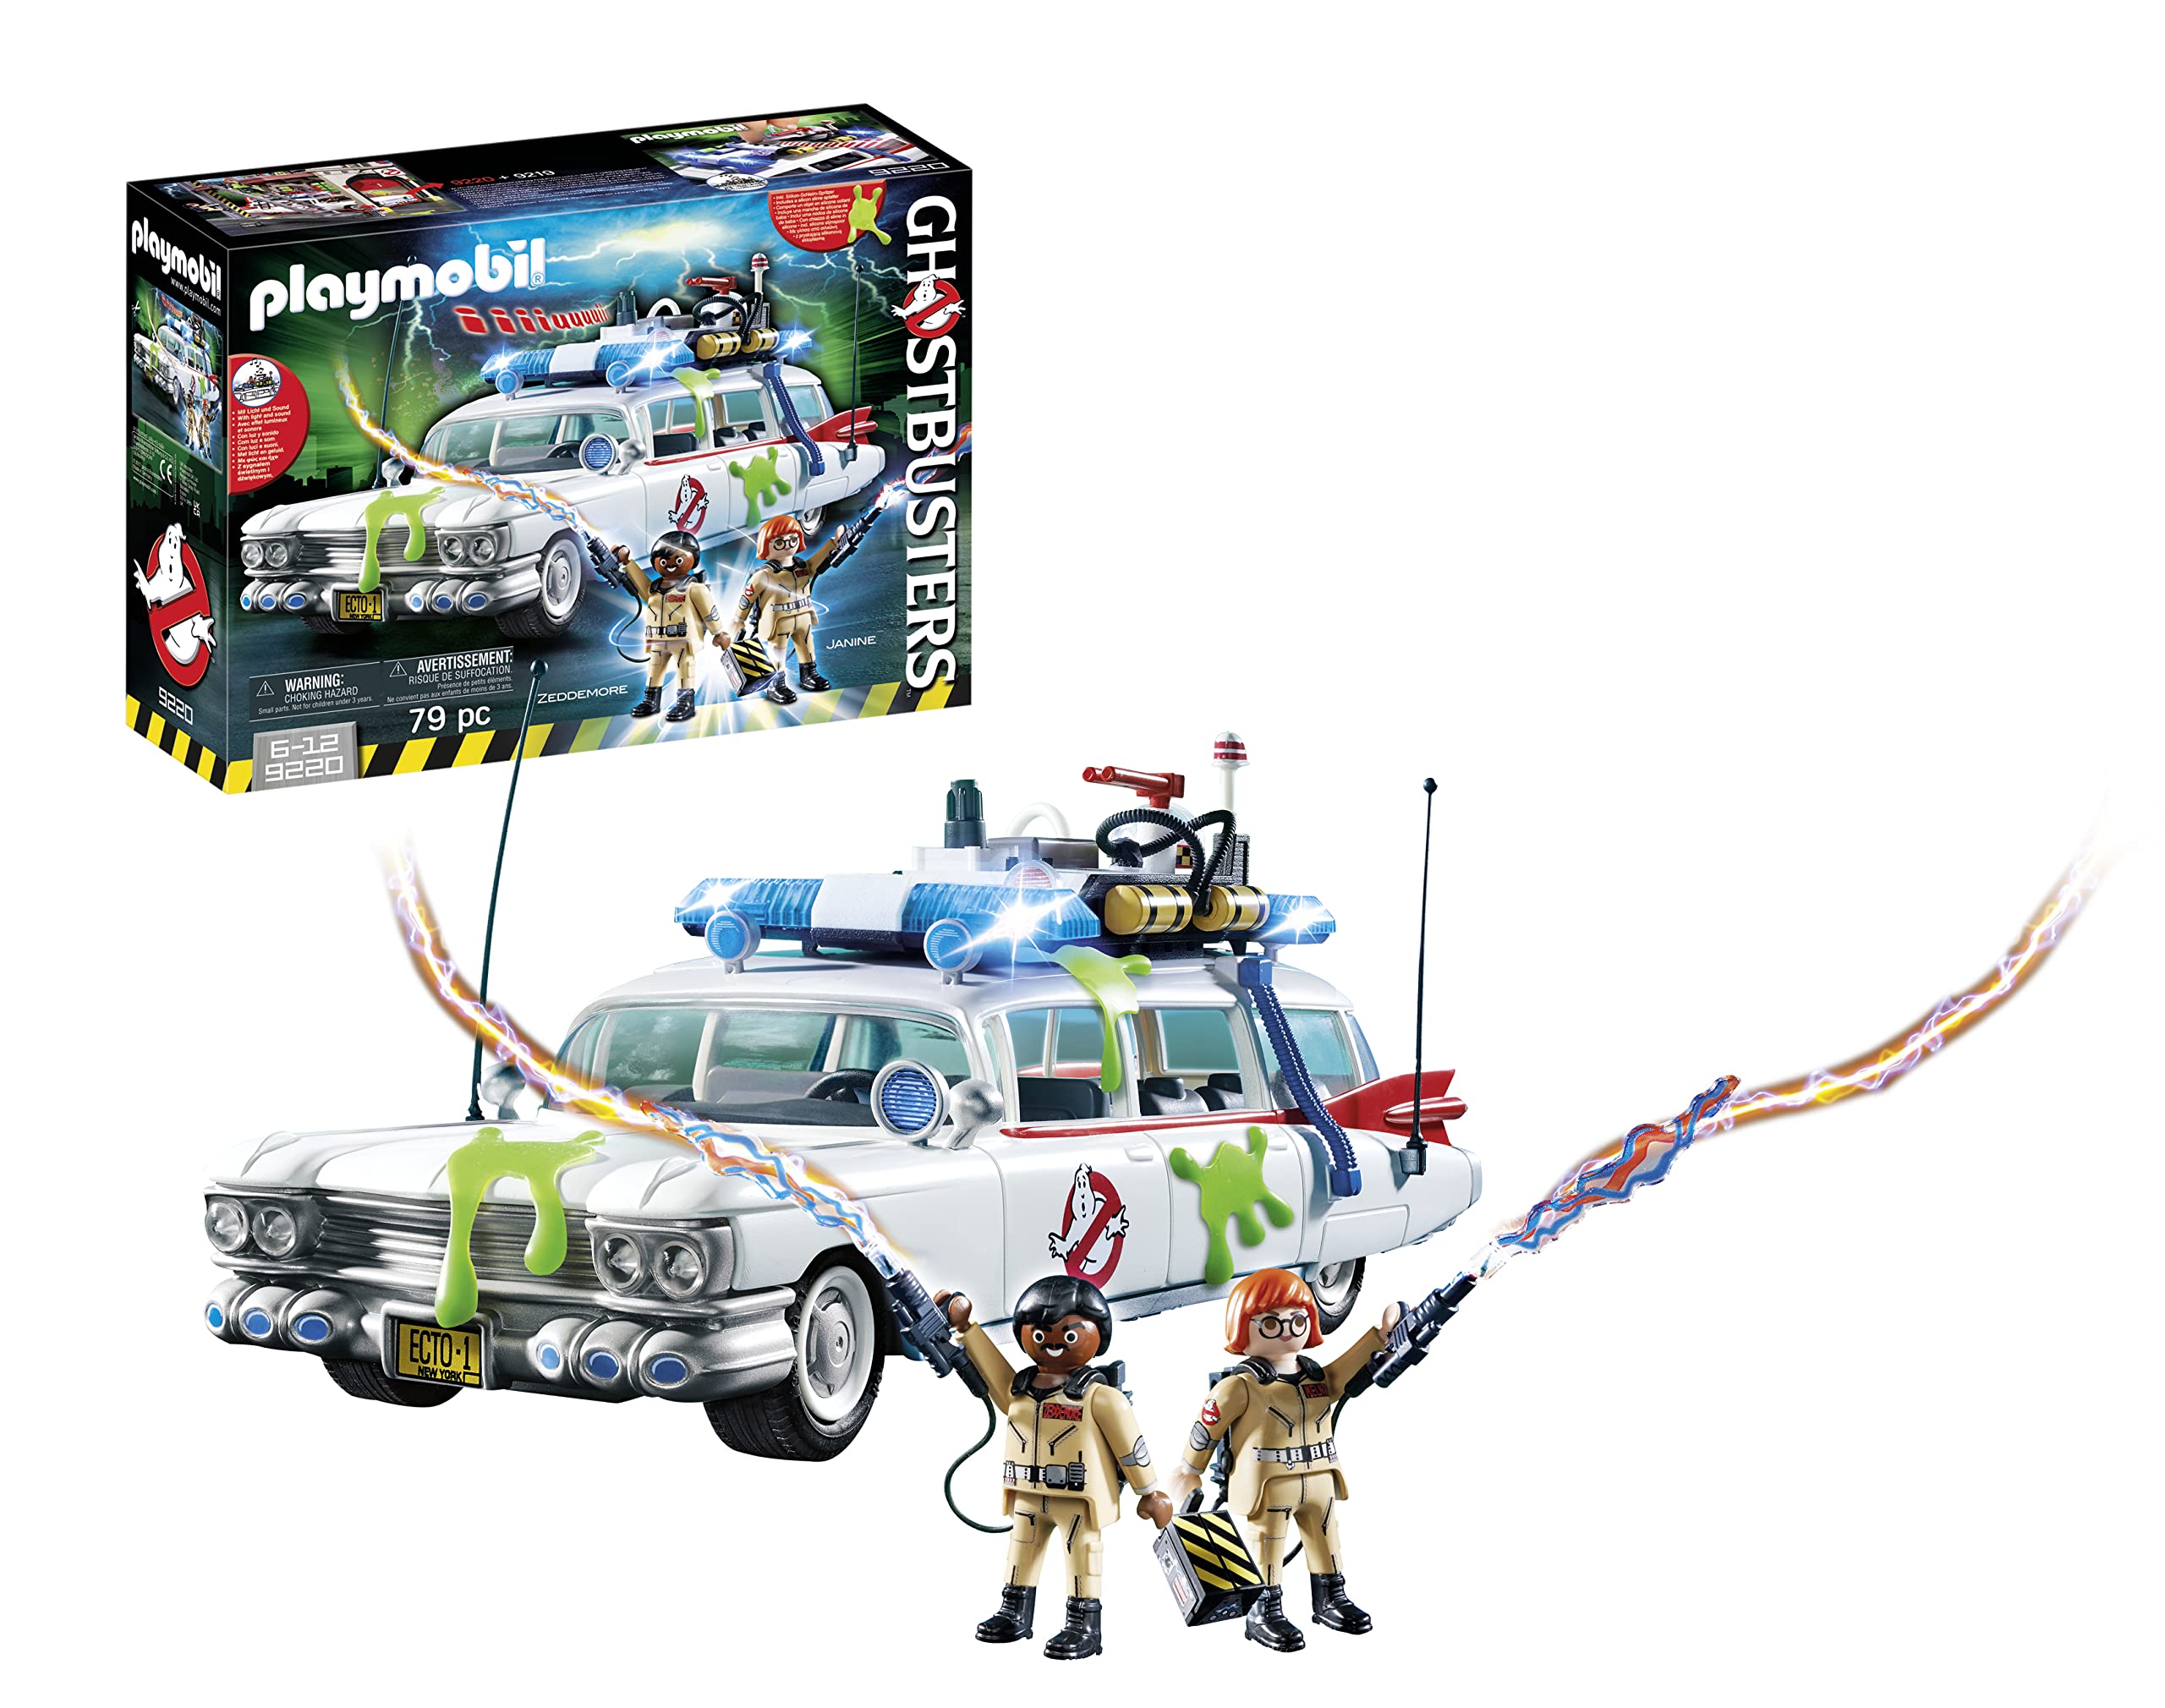 Playmobil Ghostbusters Ecto-1